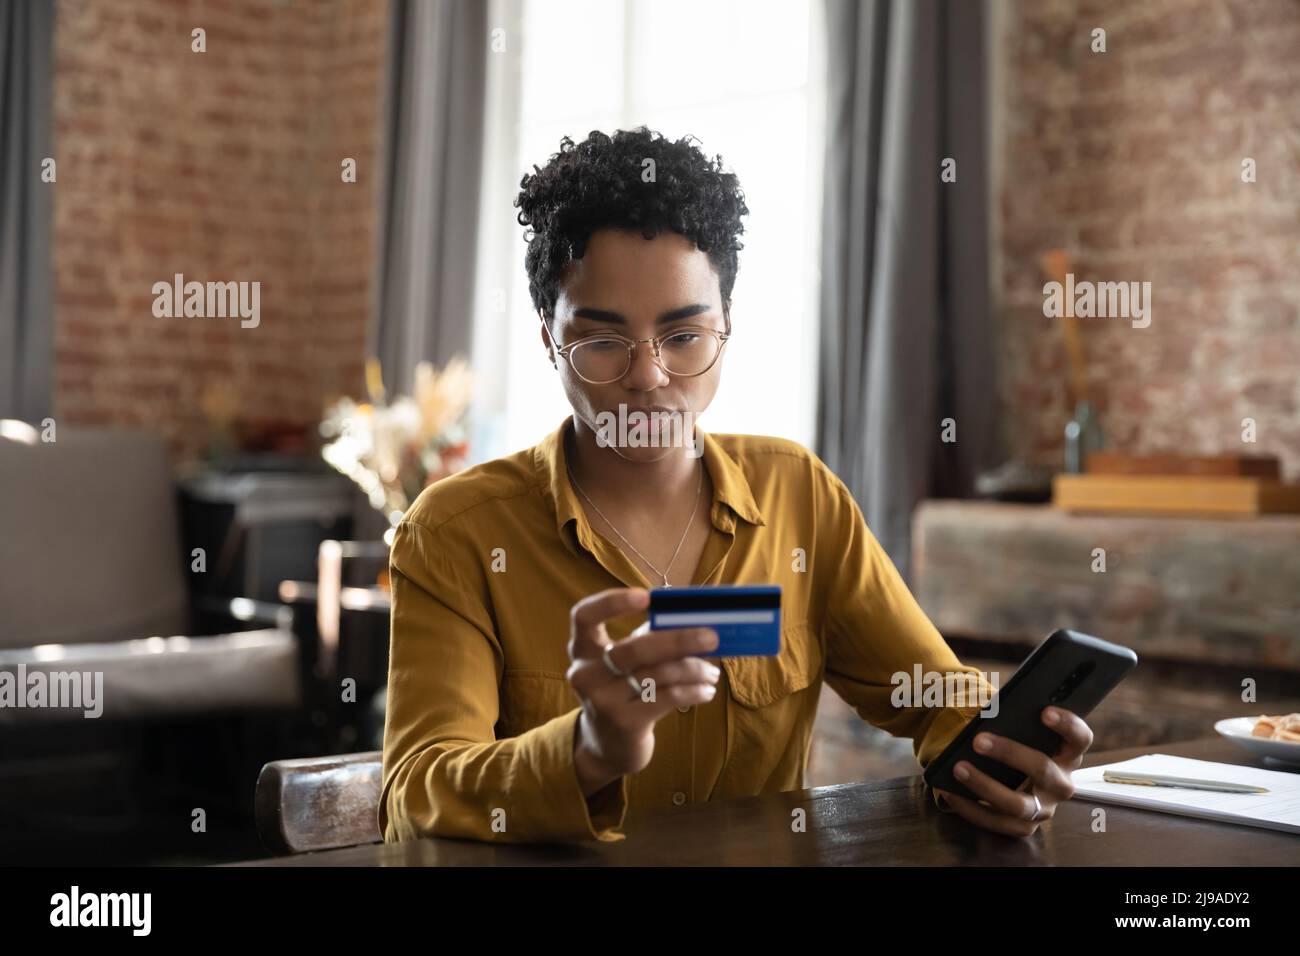 Serious African woman makes money transfer use smartphone and card Stock Photo